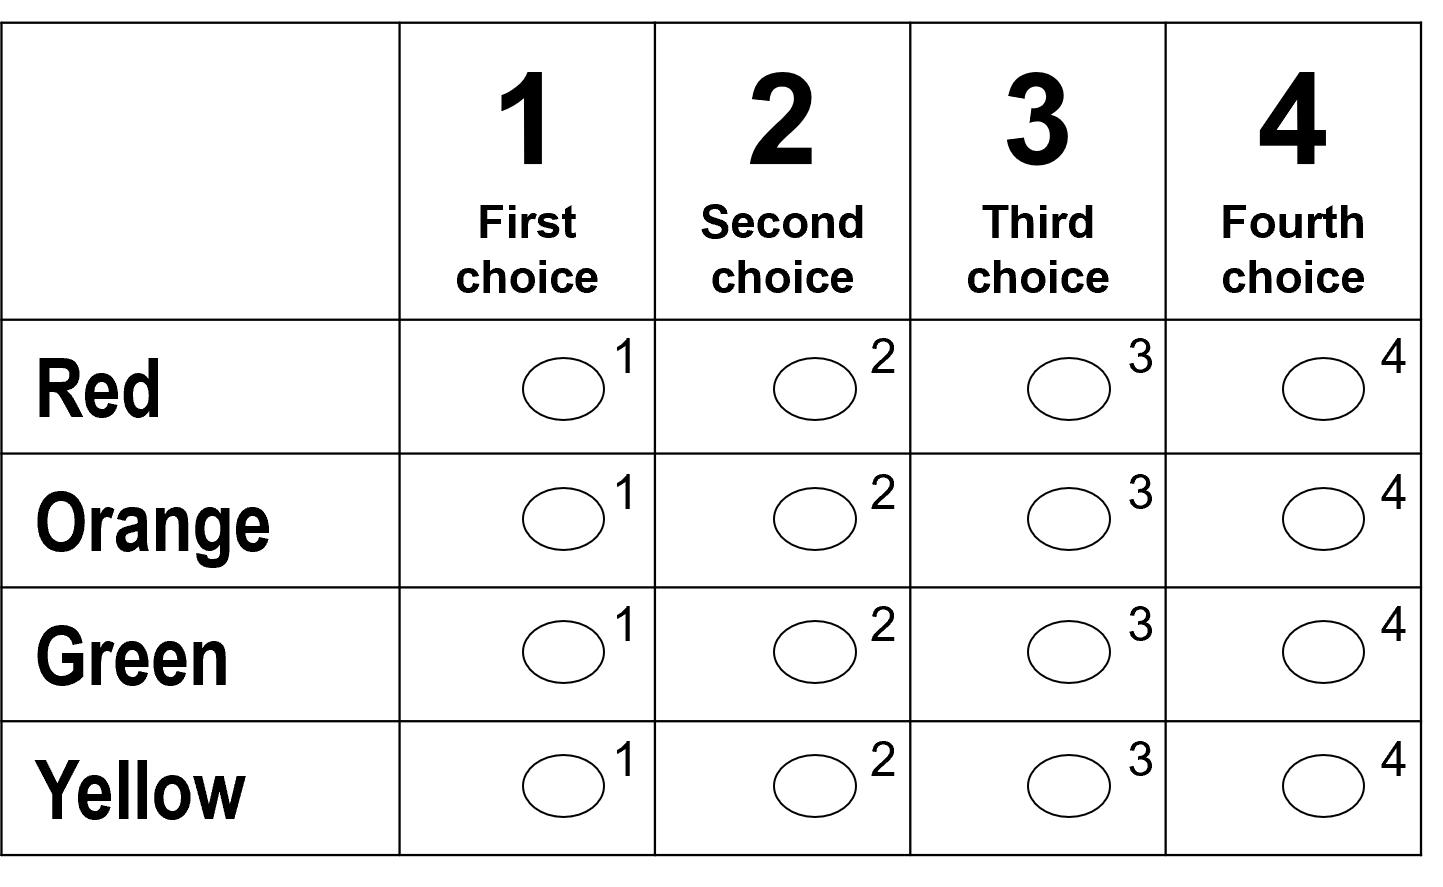 Example of ranked choice voting ballot contest